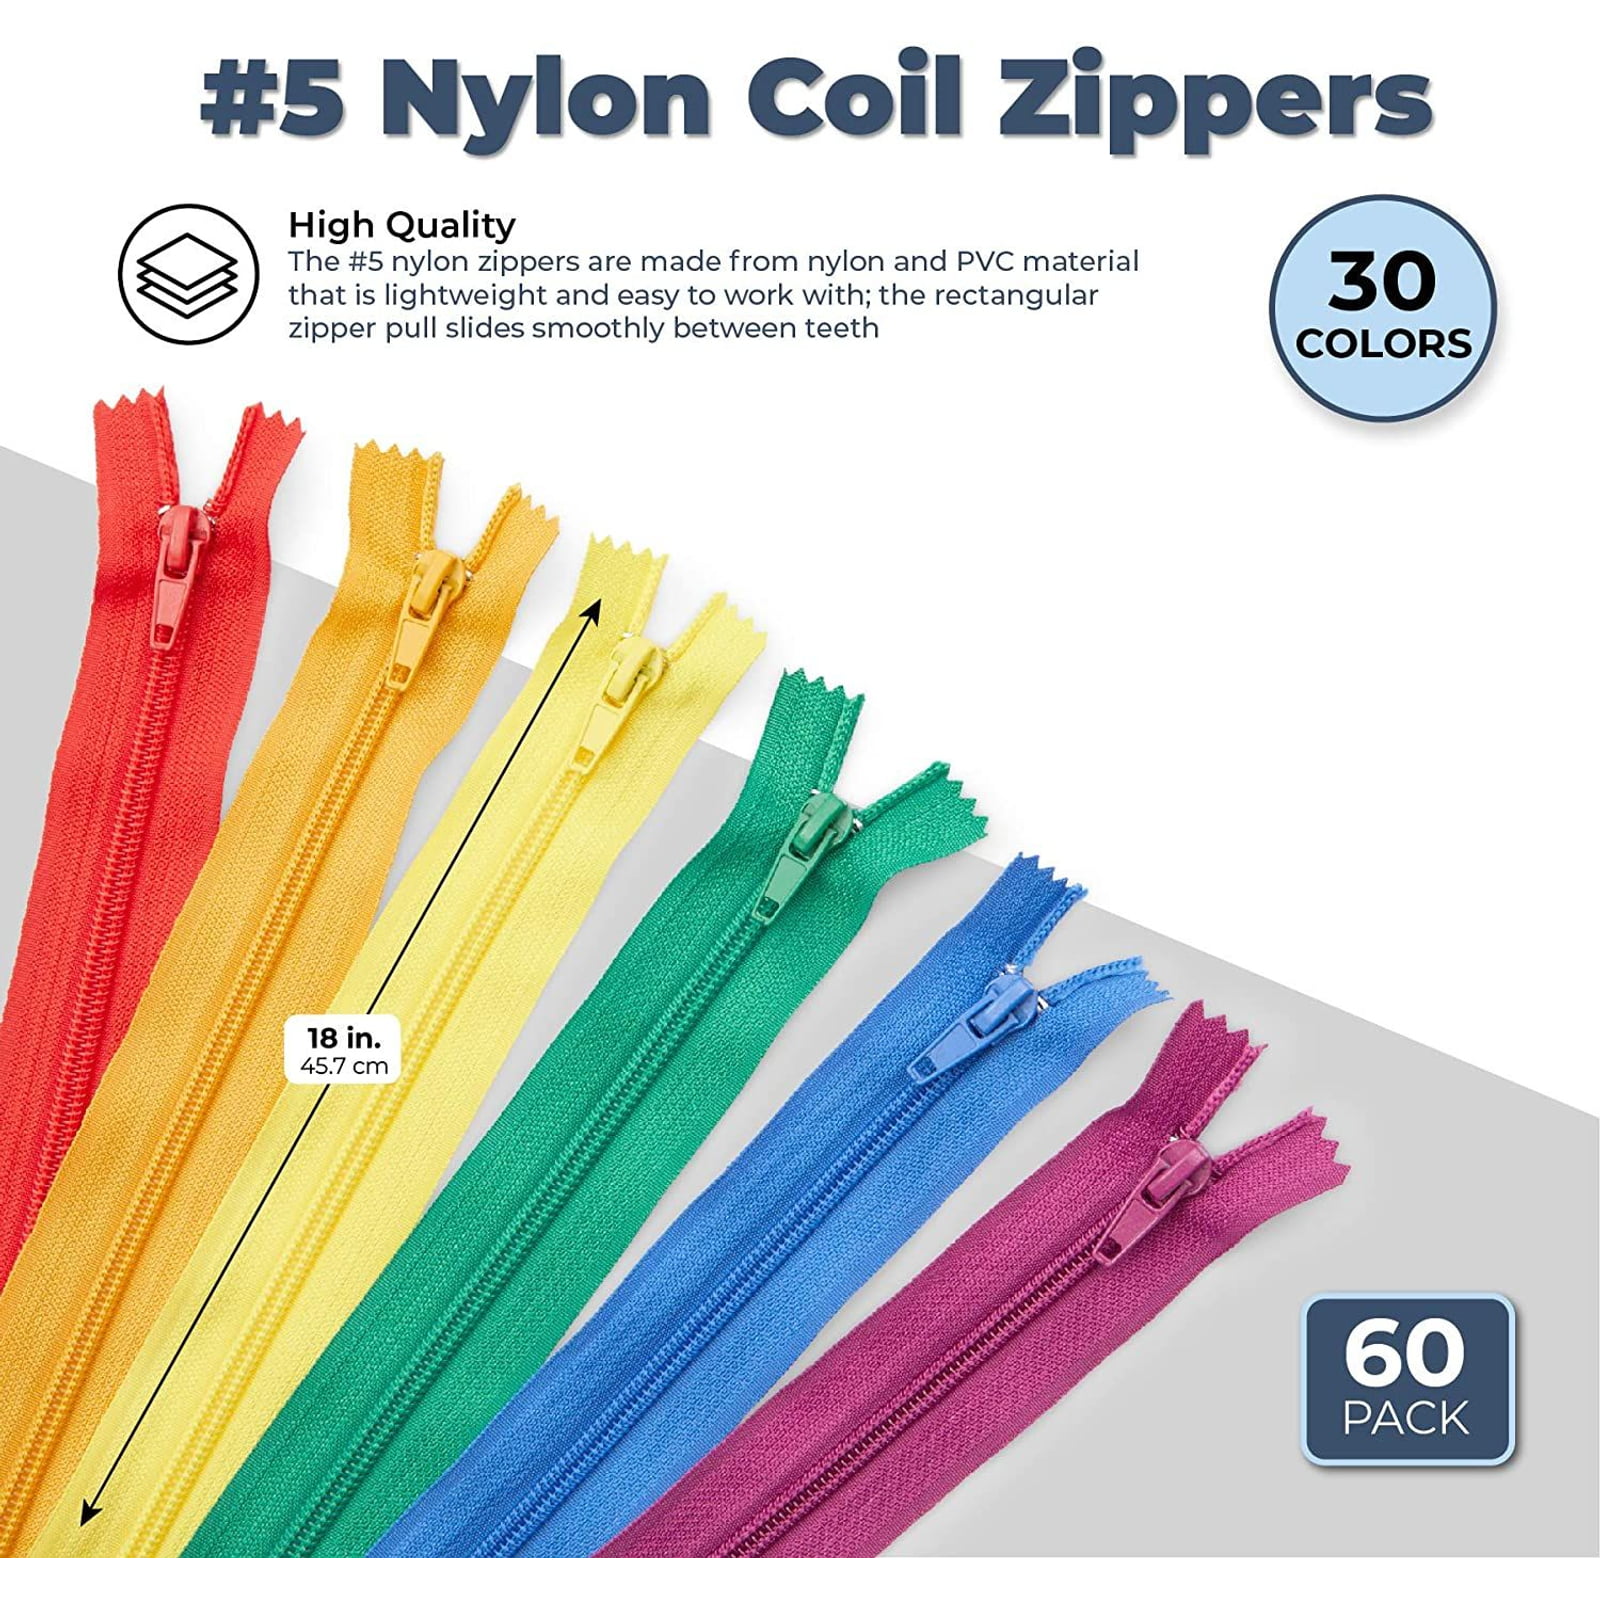  SHRJ 42 Yards 14Pcs Zippers by 5 Nylon Coil in